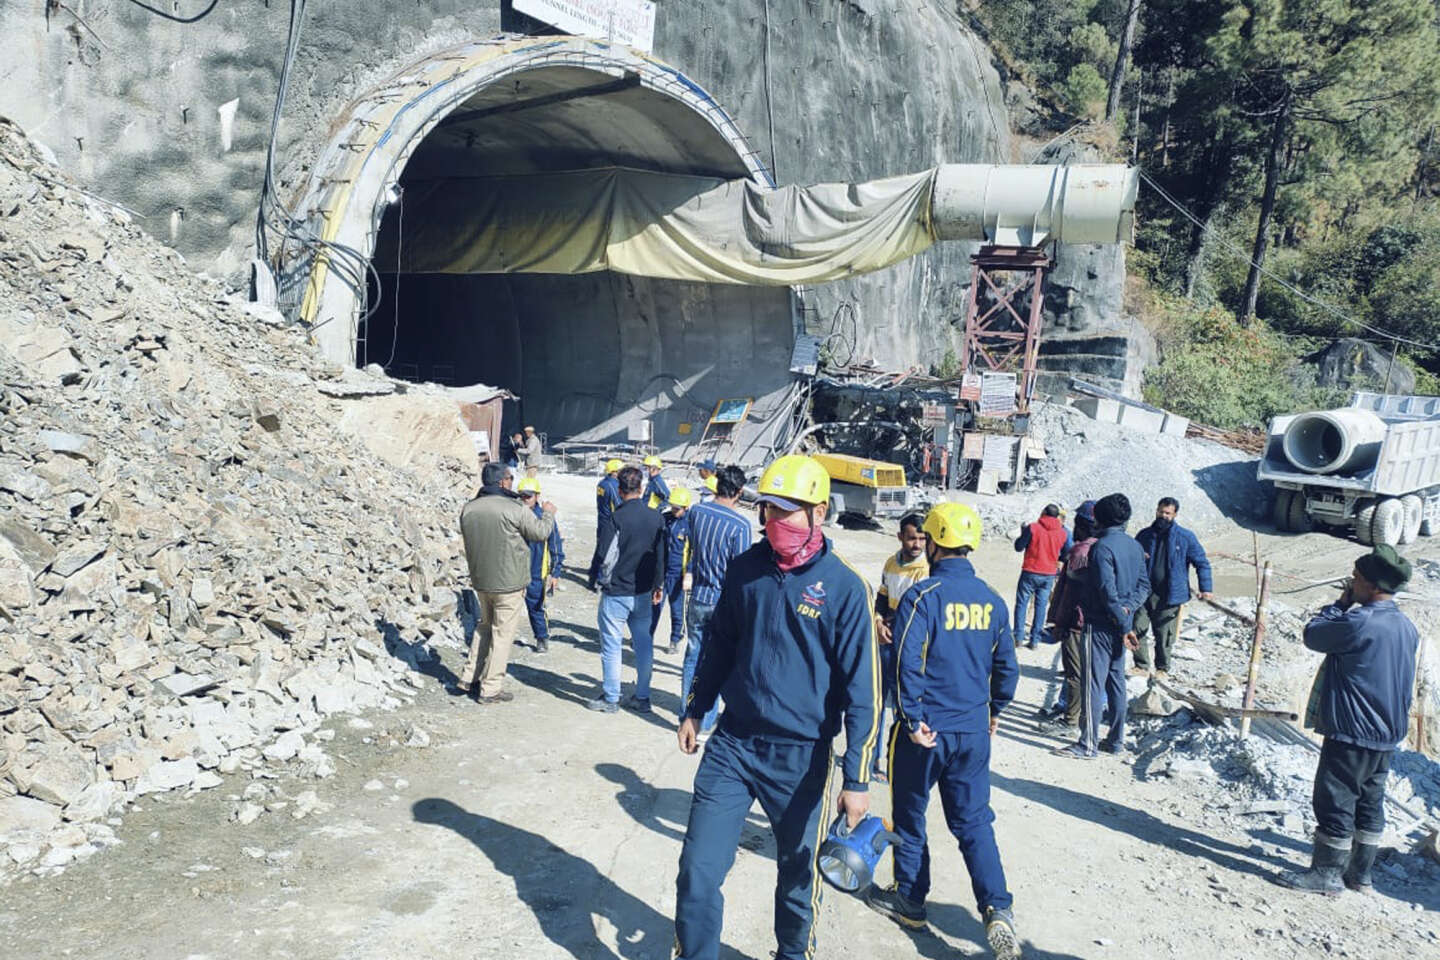 In India, forty workers are still alive after a tunnel collapse